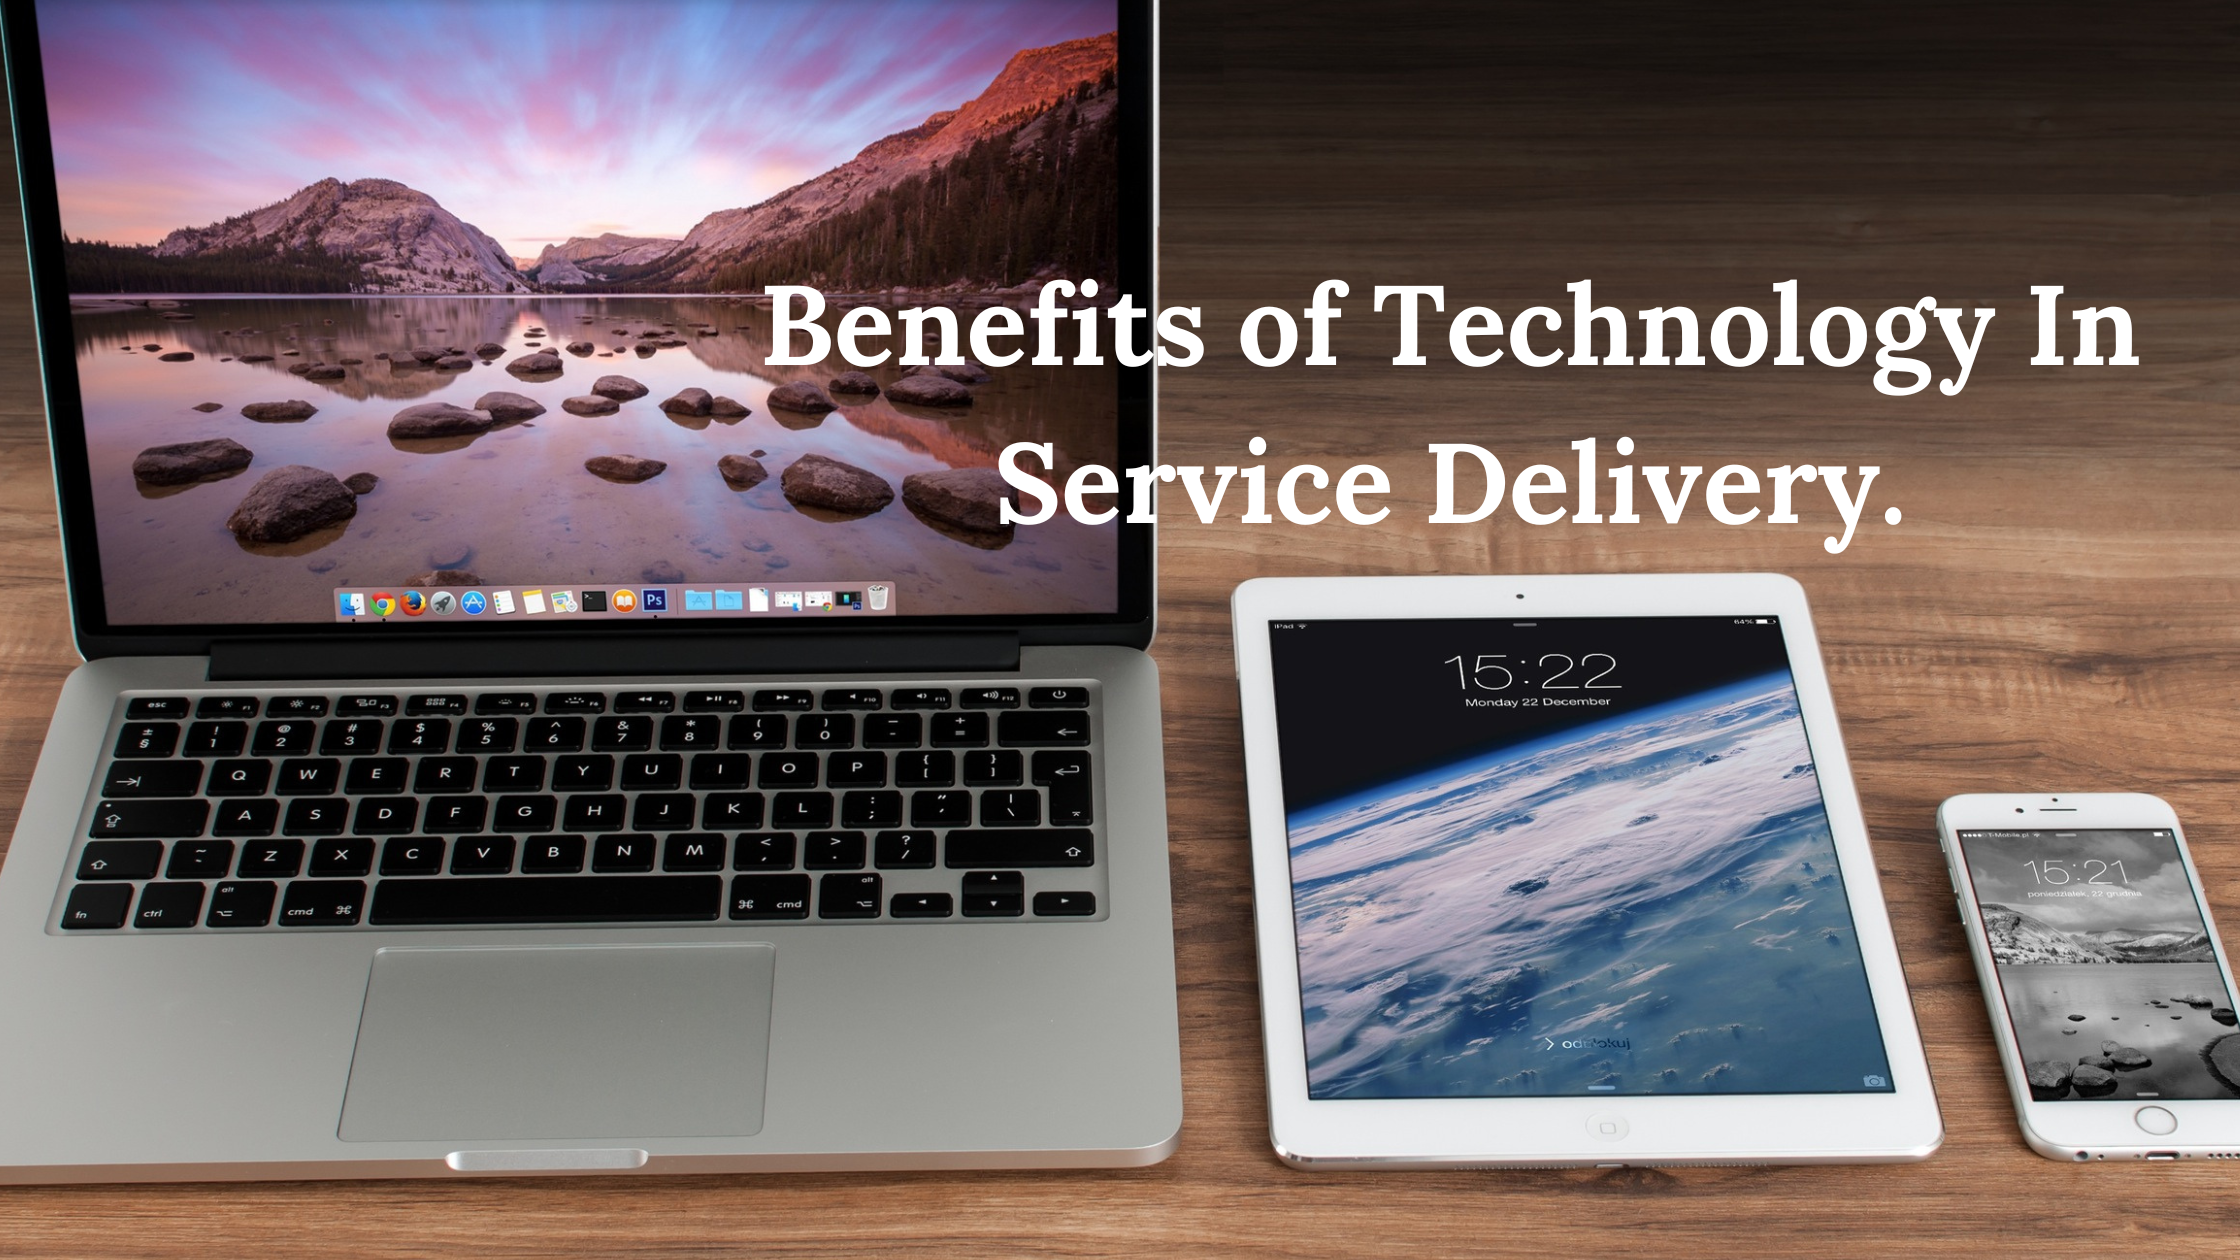 Benefits of Technology in Service Delivery.